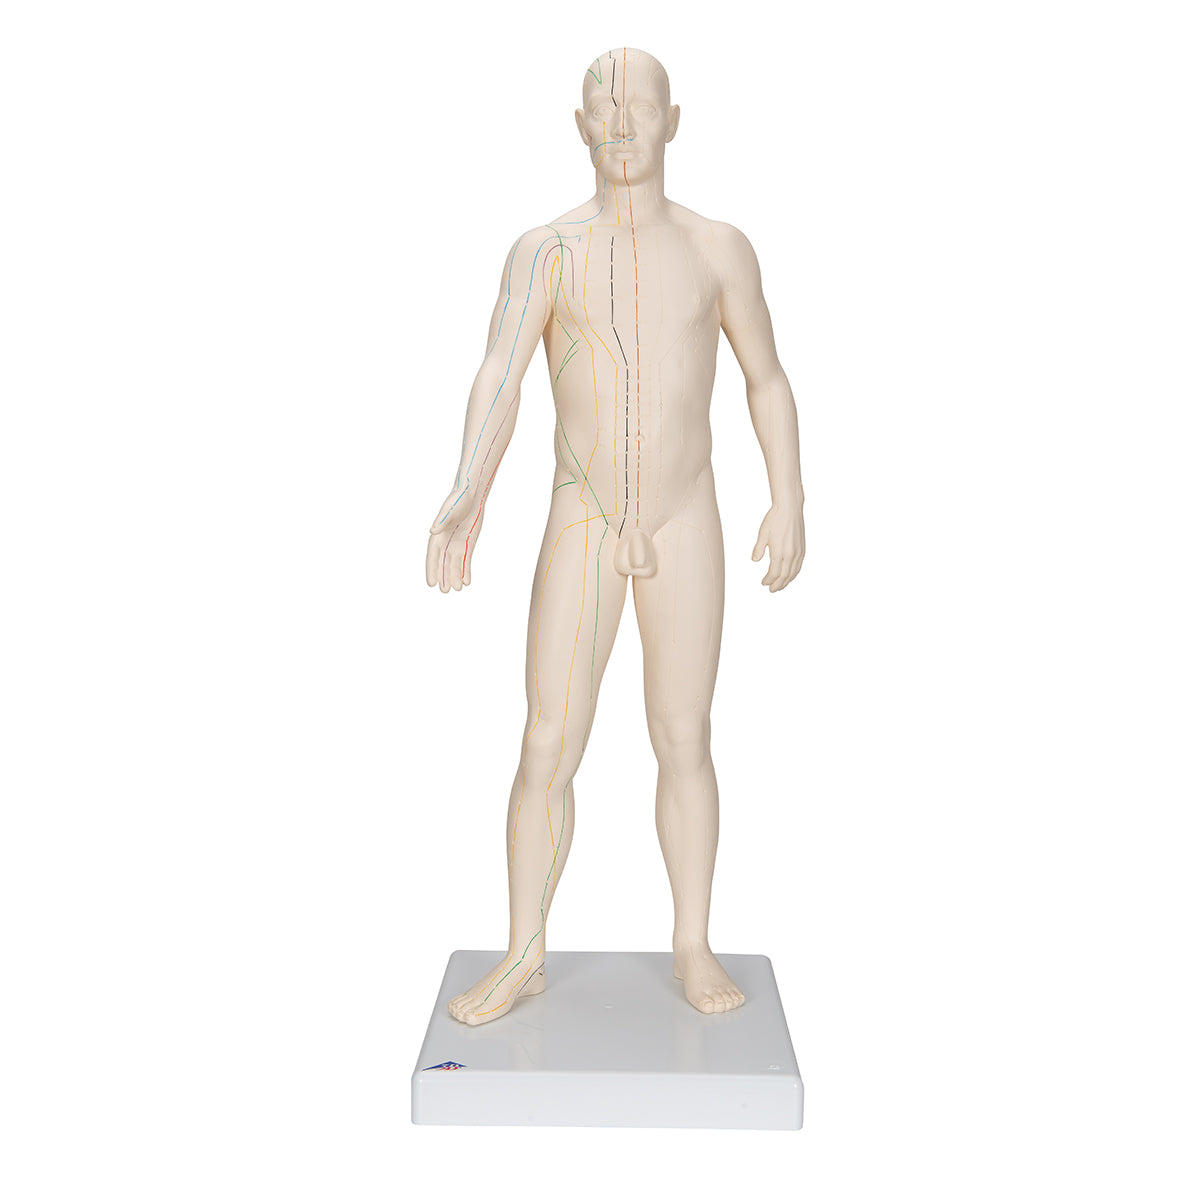 Acupuncture model of the man of 70 centimeters for professional use